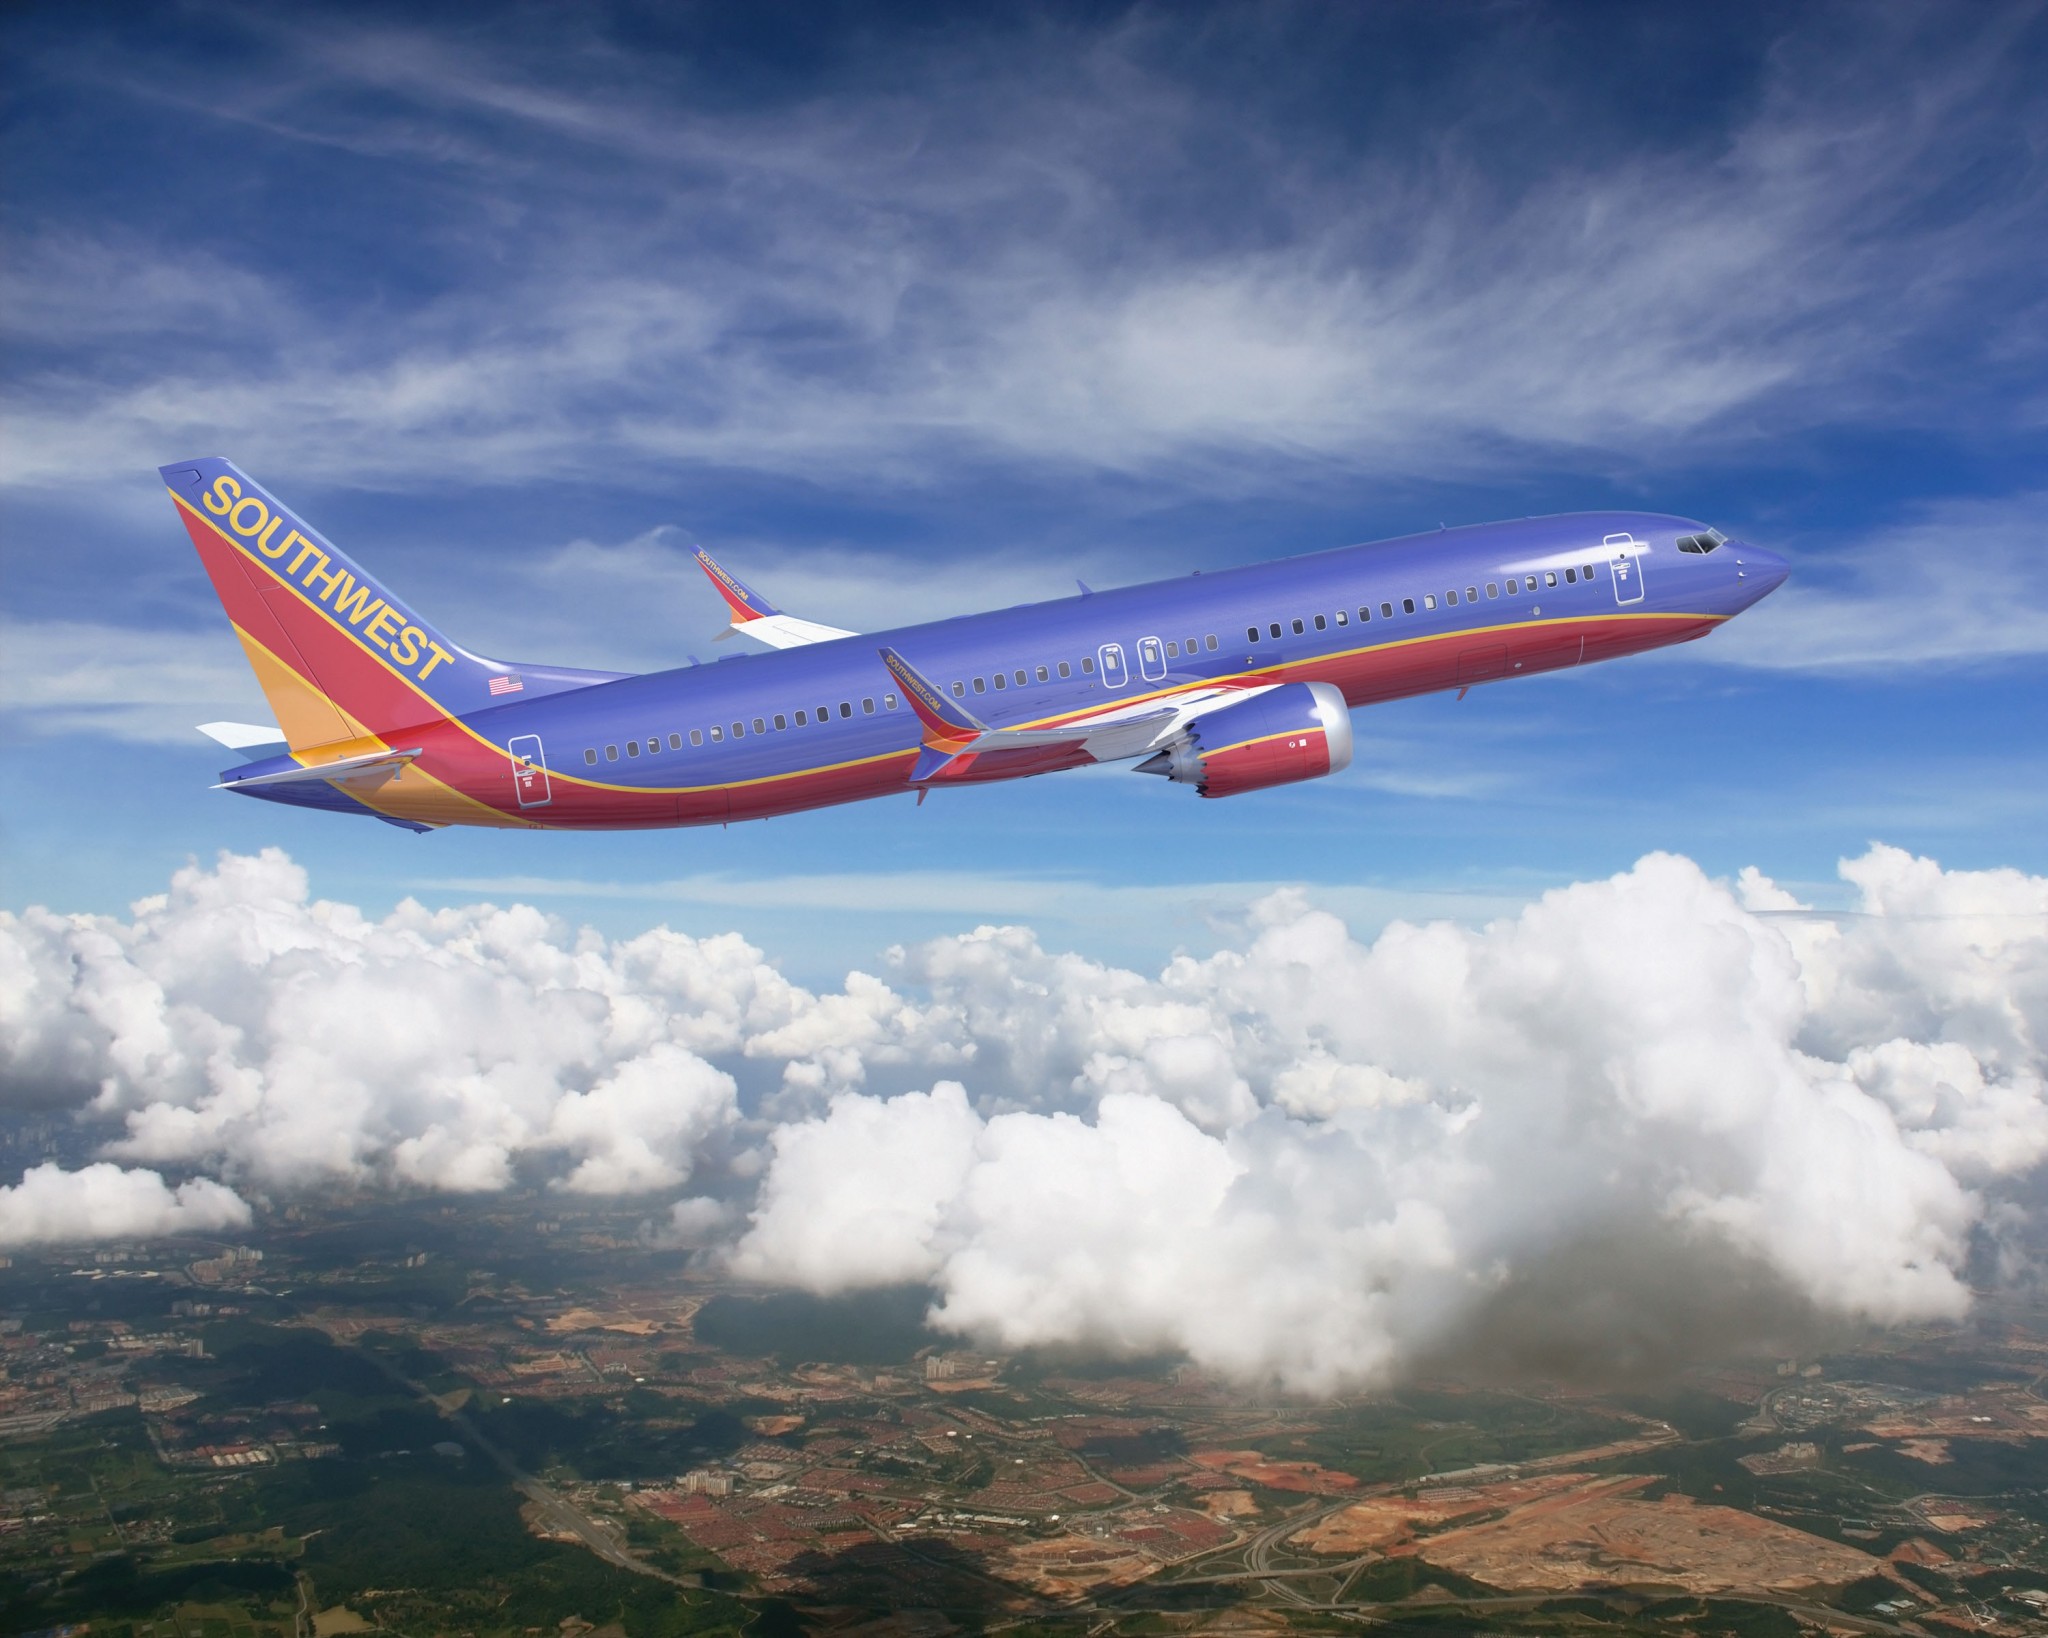 Southwest converts 24 B737 MAX 7 order to larger MAX 8 variant citing certification delays